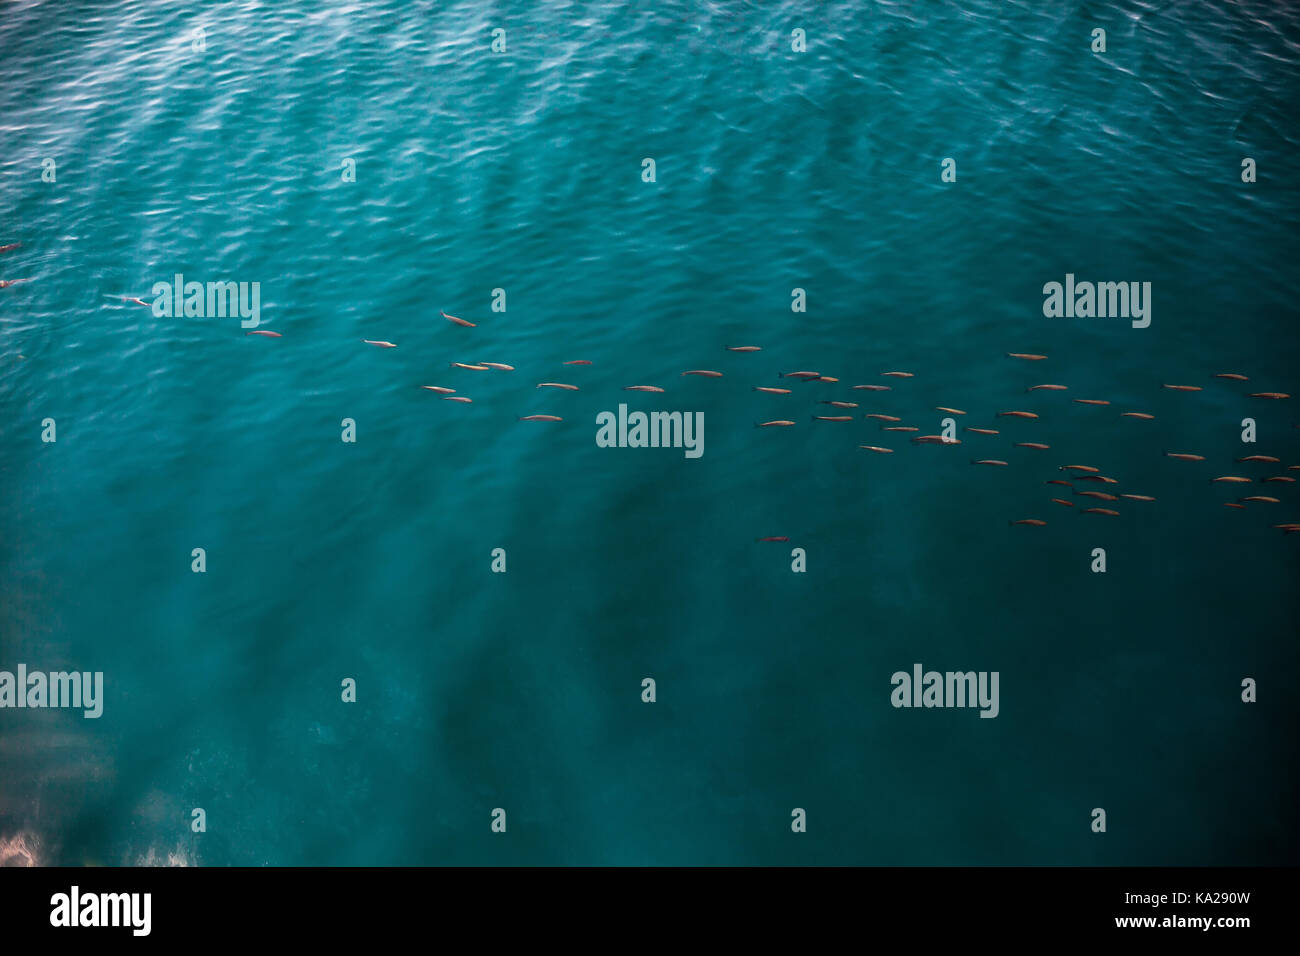 Flock of small sea fish in the water. Stock Photo